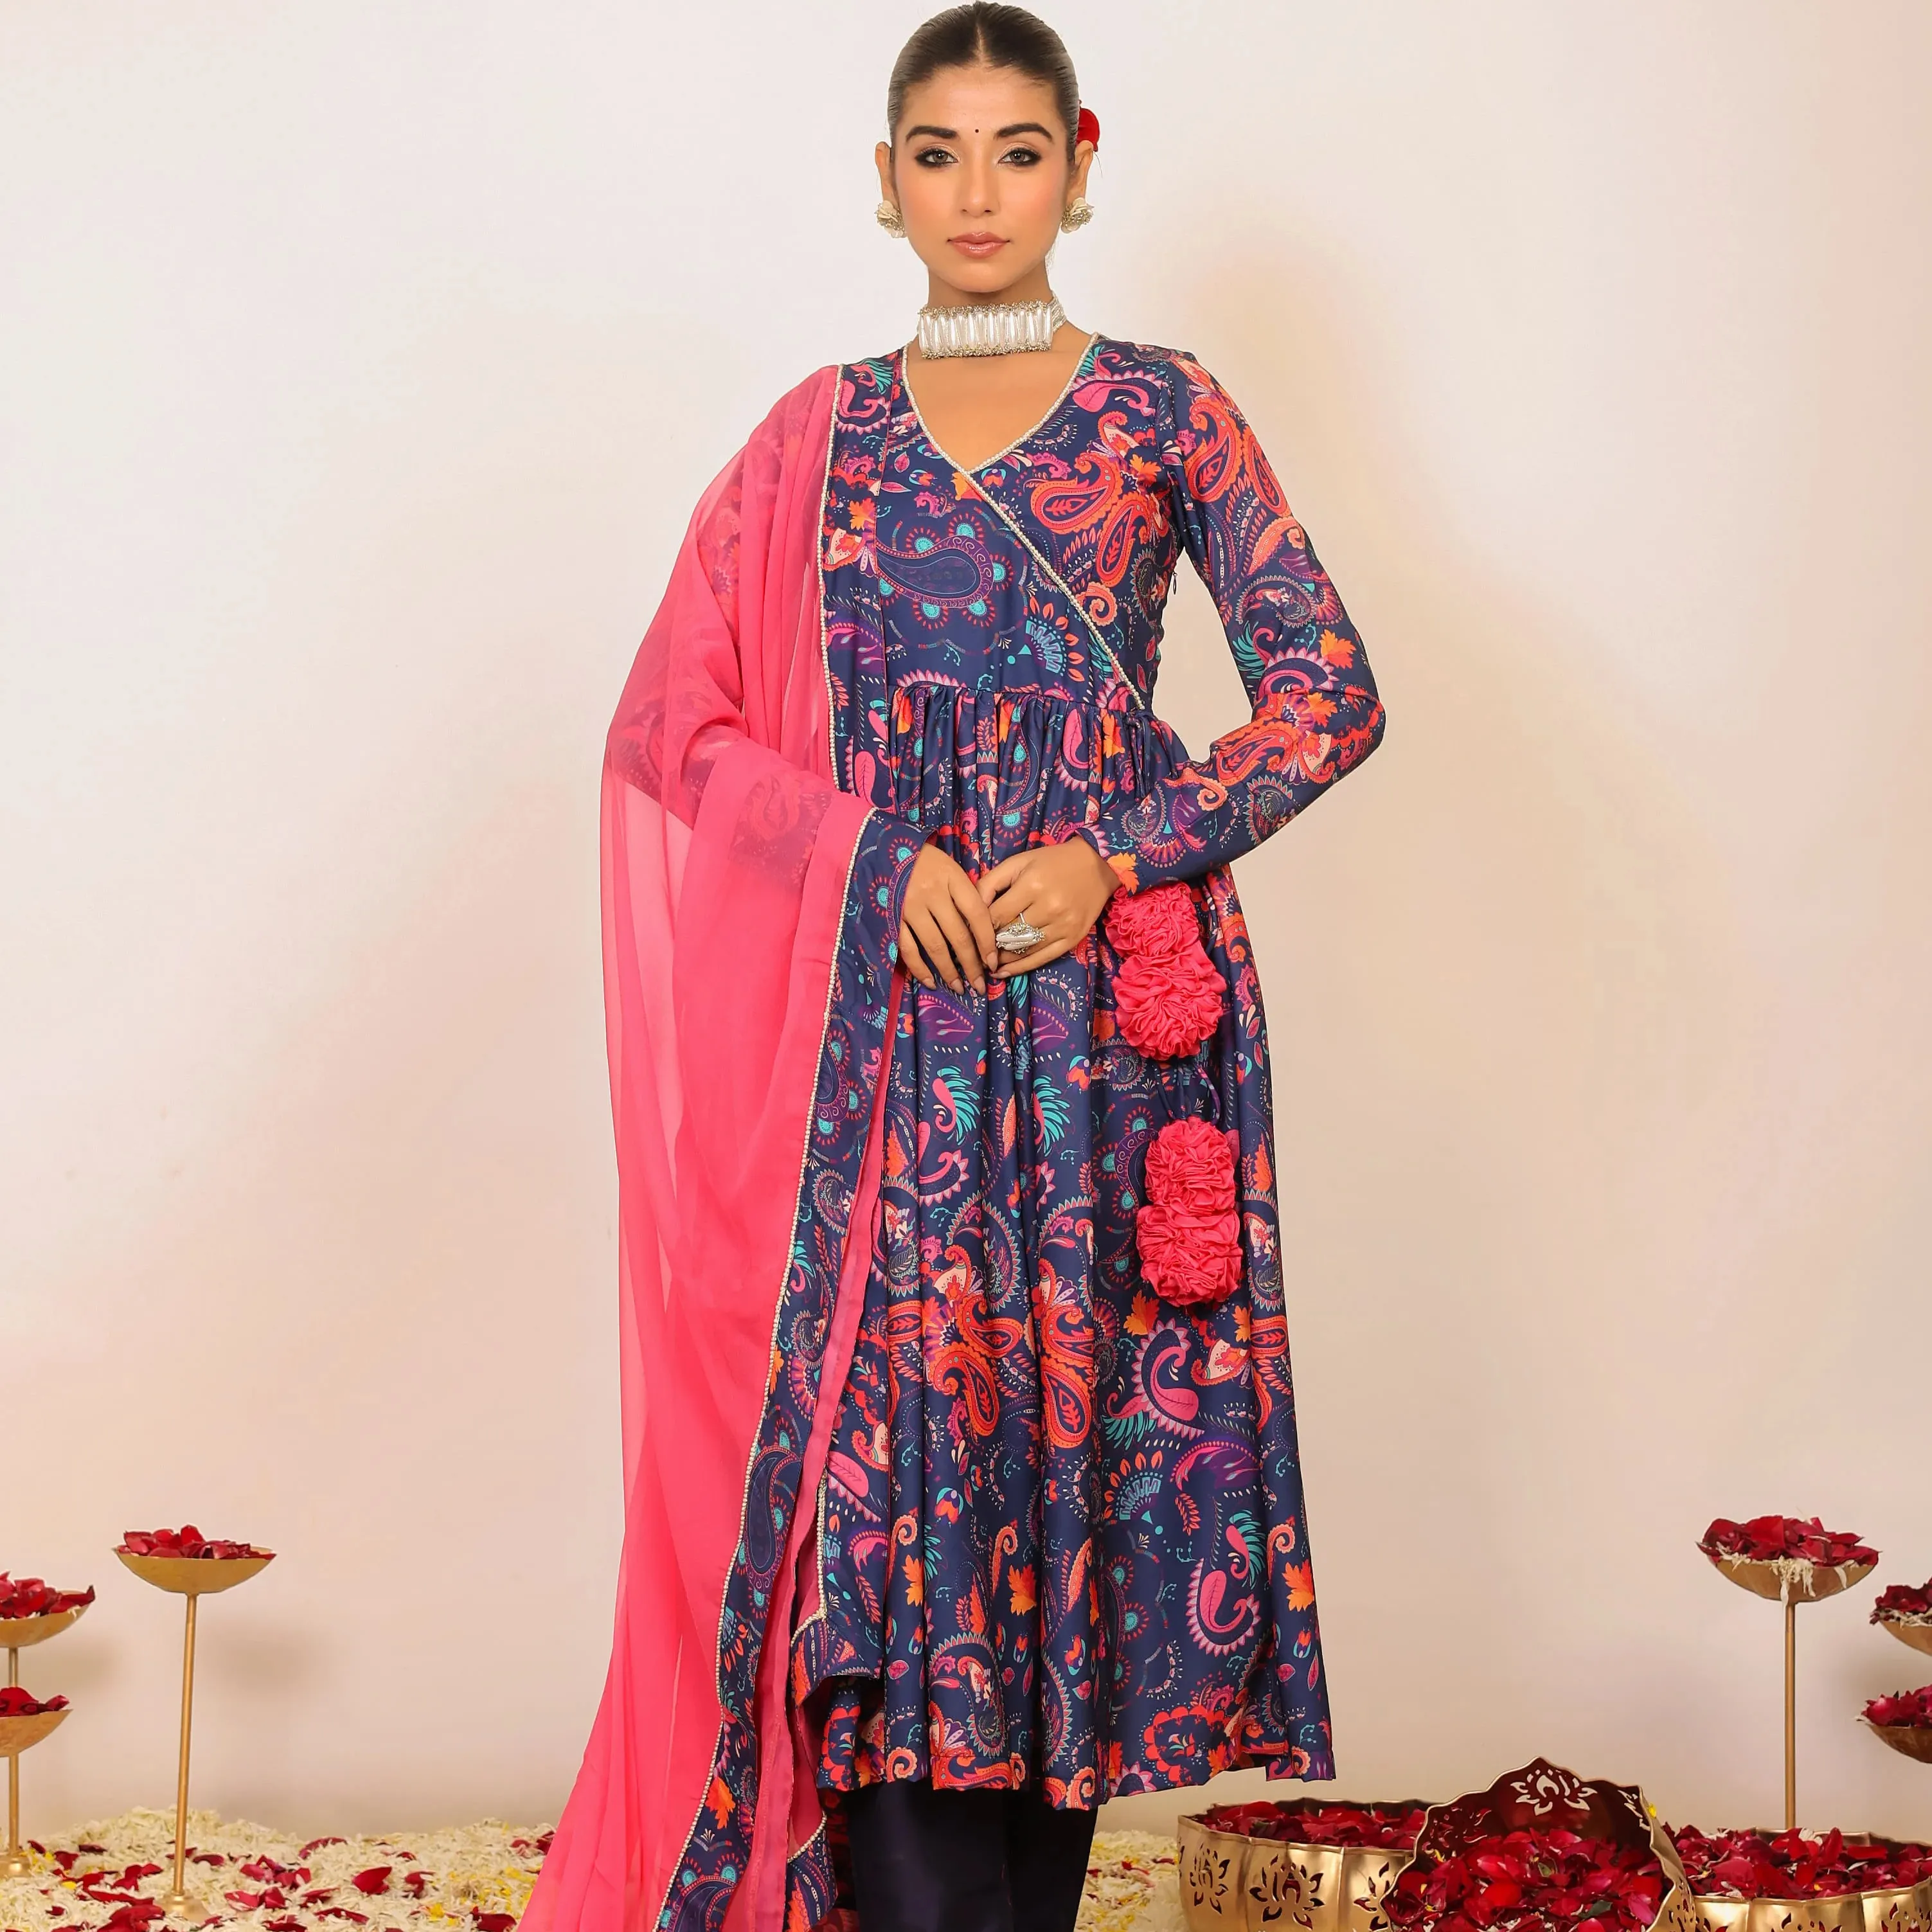 The mesmerizing combination of pink and blue creates a harmonious blend The Anarkali kurta and pant showcase intricate prints